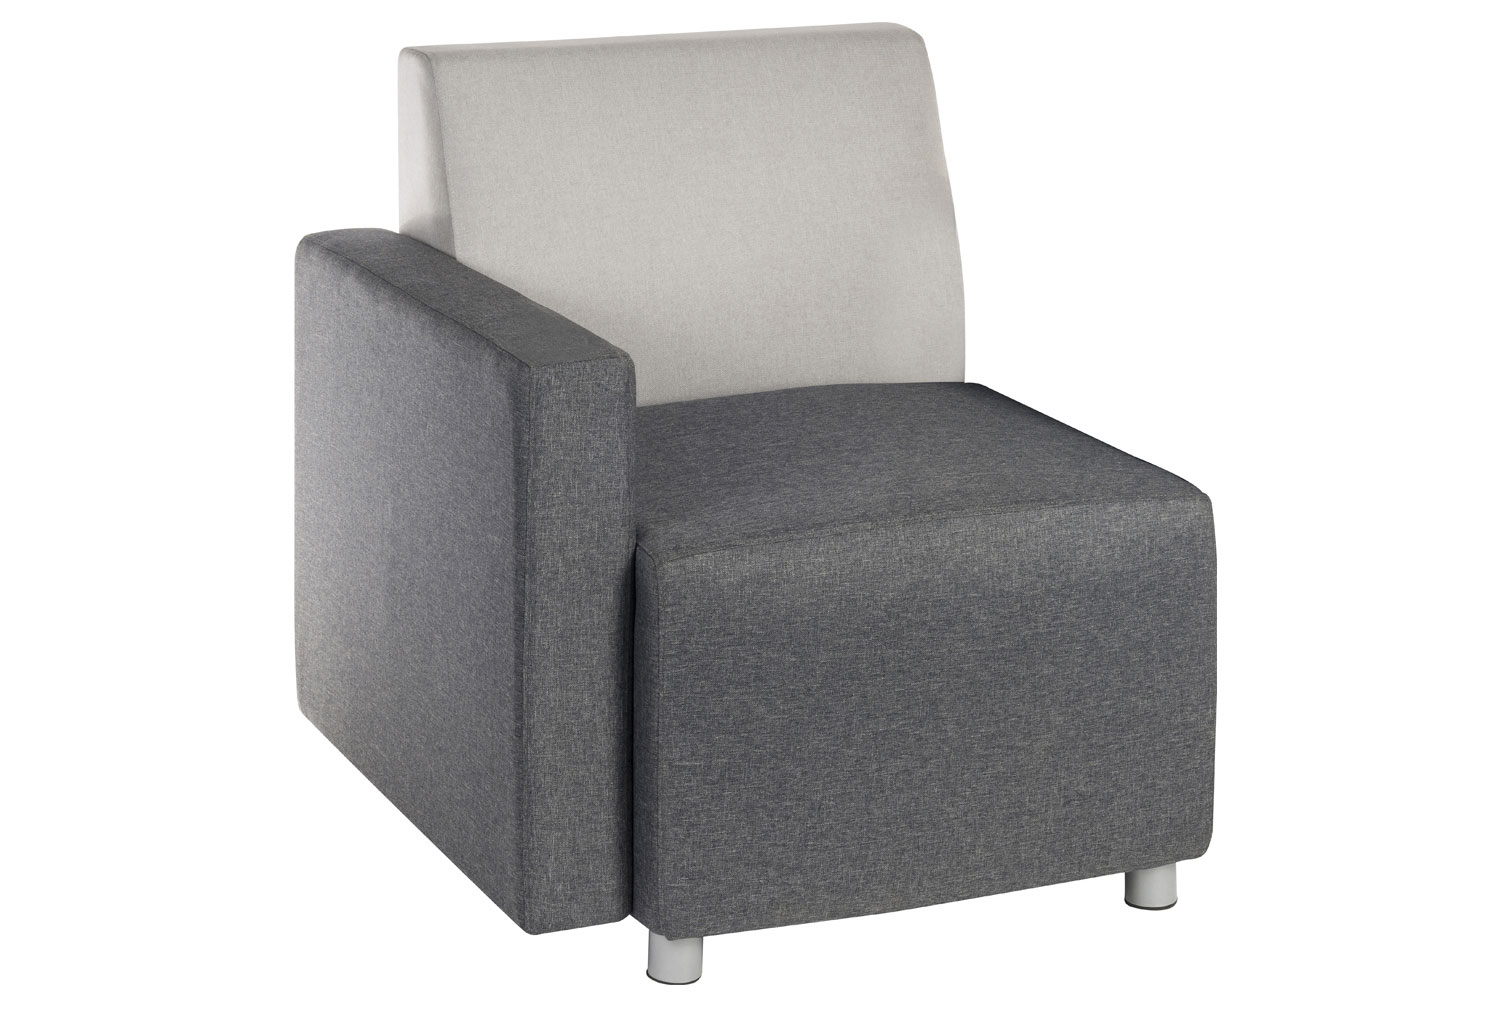 Geometry Modular Reception Seating, Chair With Right Arm